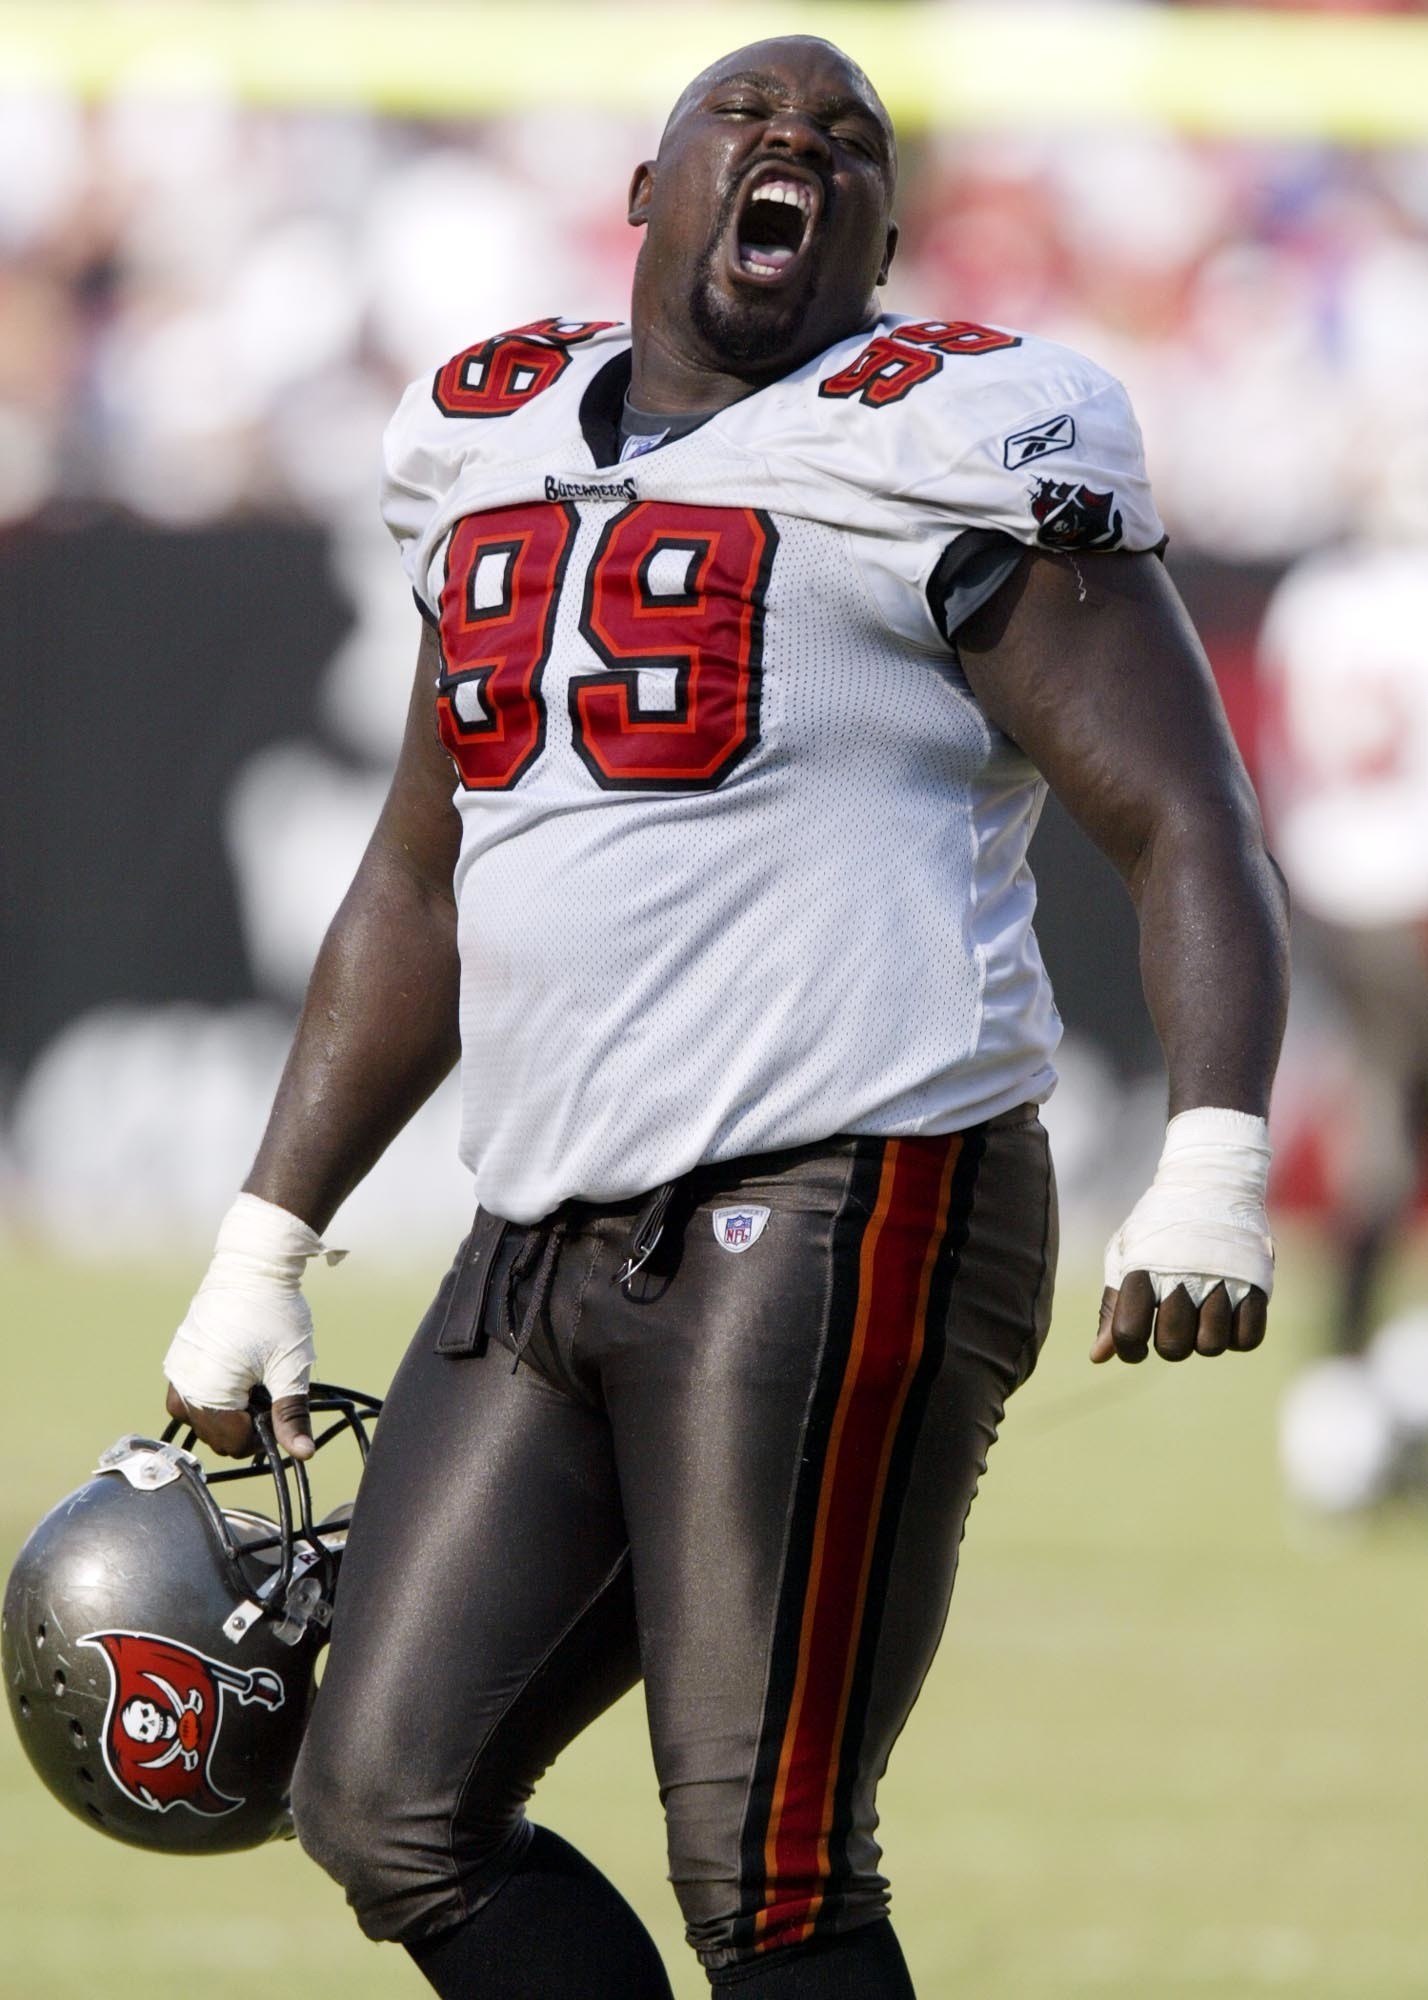 'My memory ain't what it used to be': Warren Sapp says he'll donate his